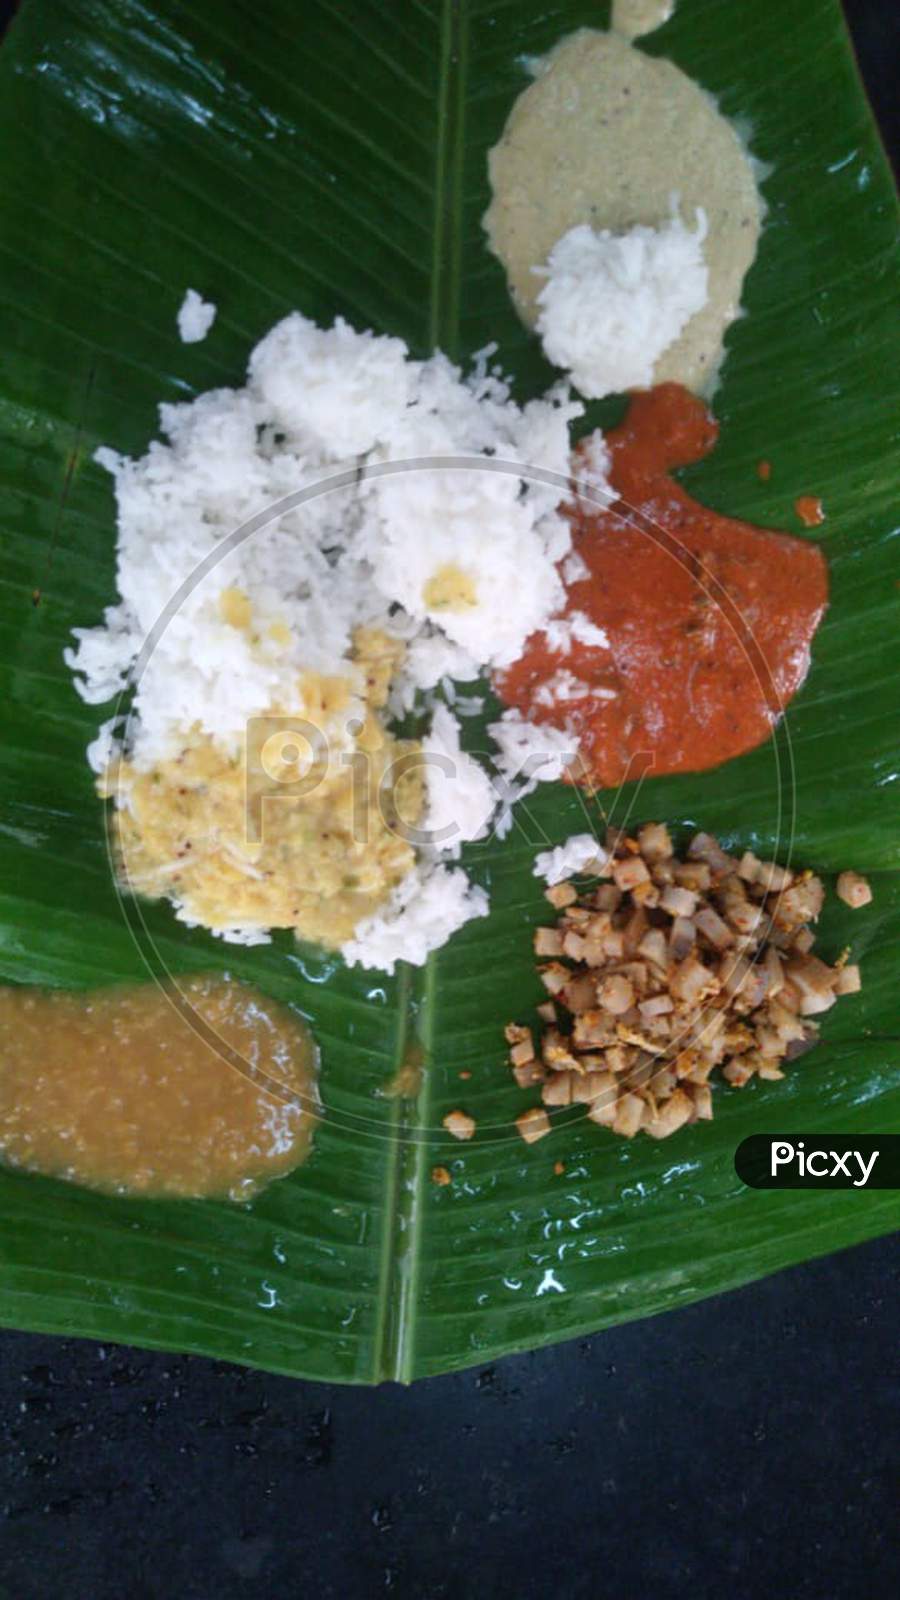 Indian style white rice and varieties